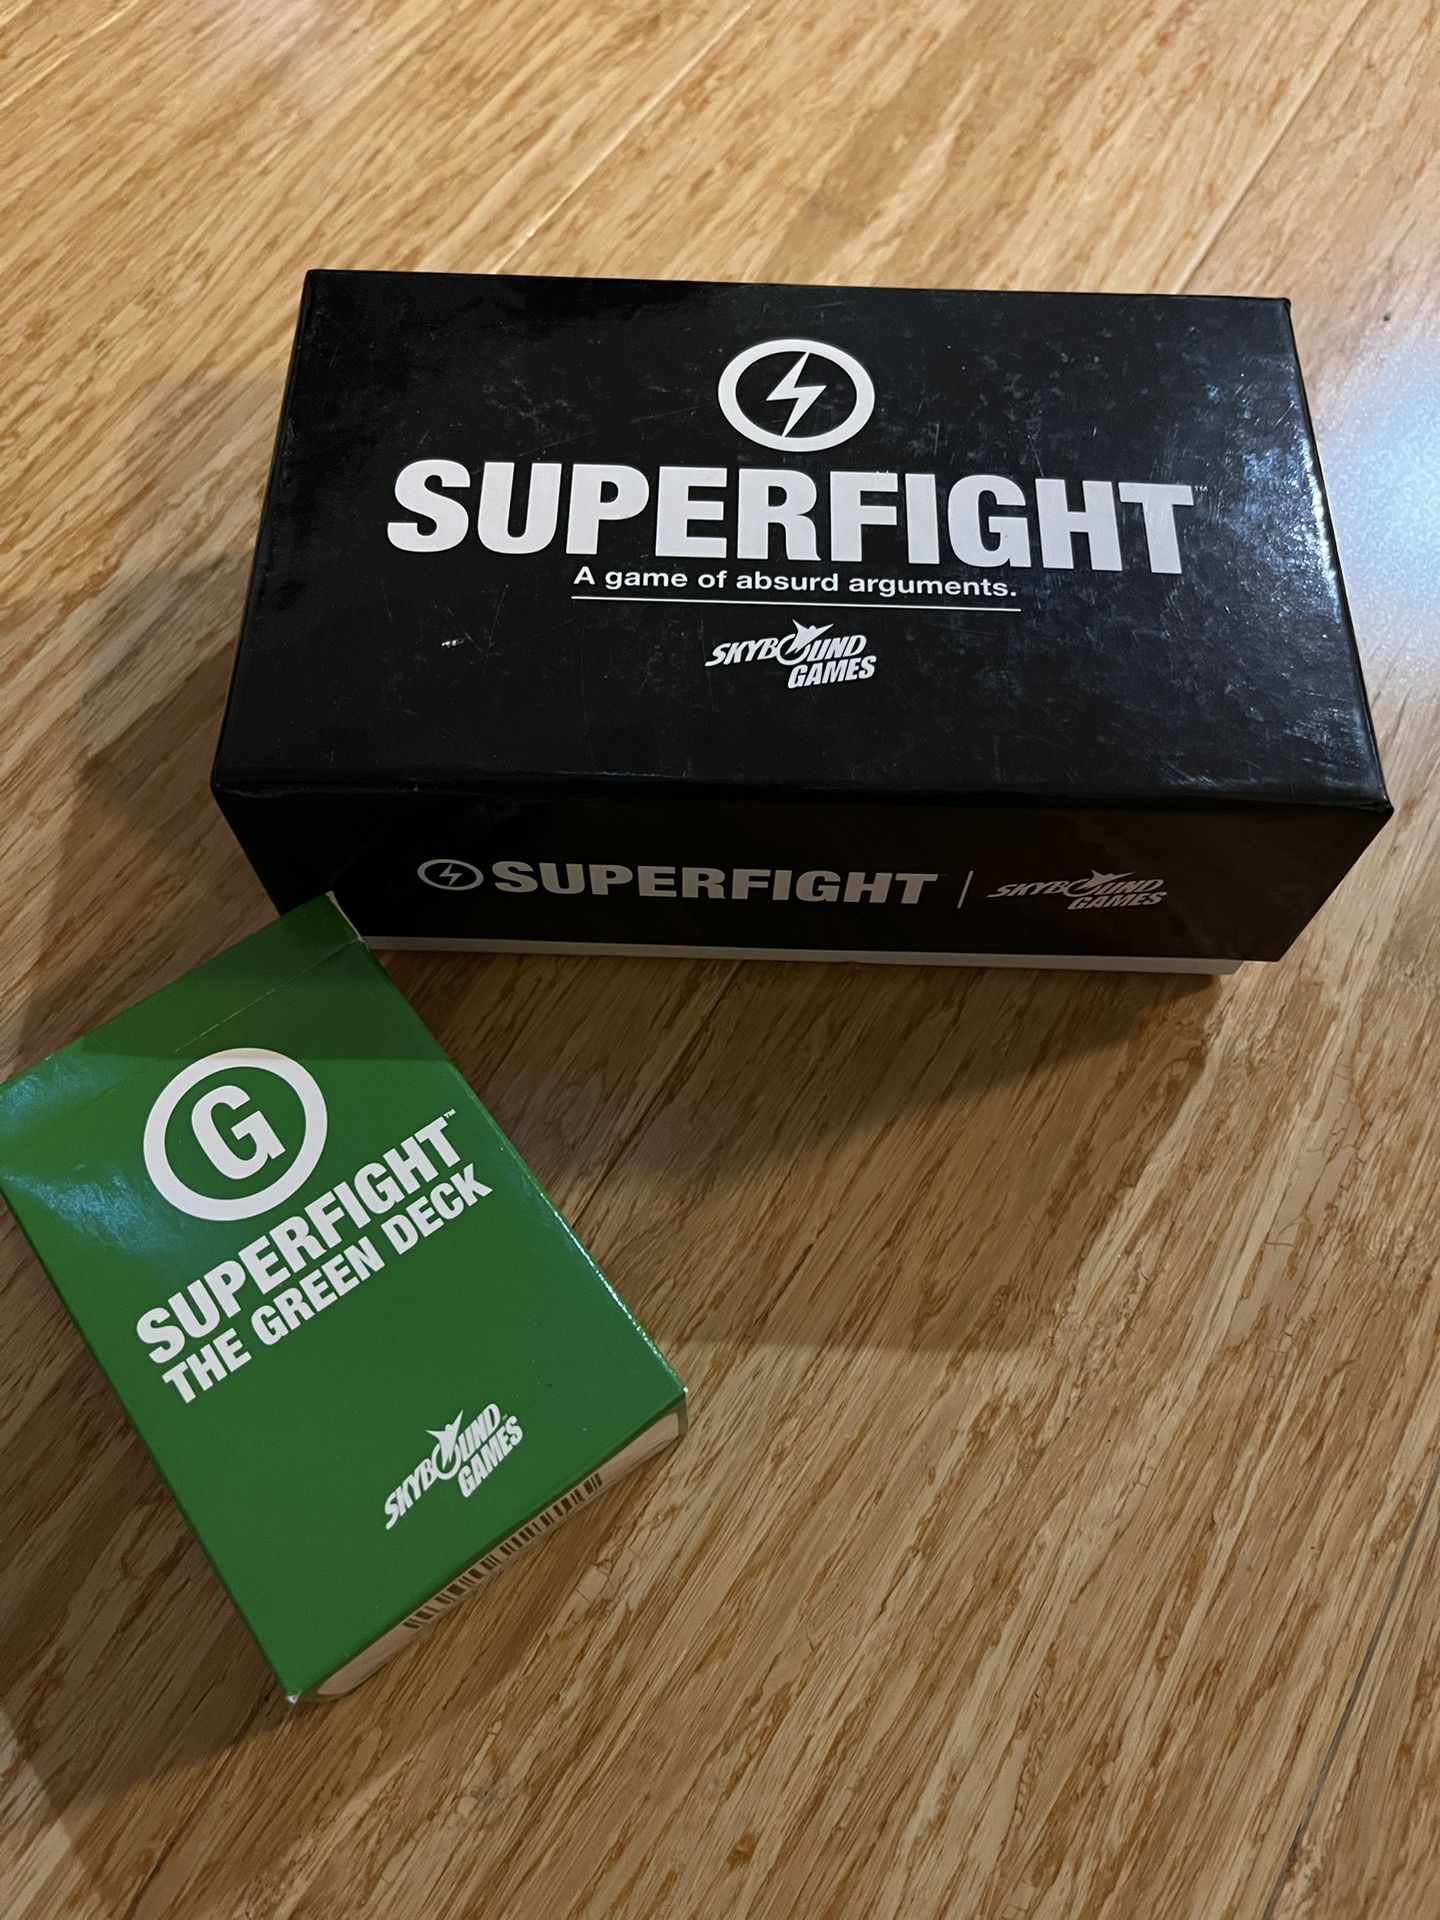 ***PRICE DROP*** Superfight Card Game plus Green Deck Expansions For 